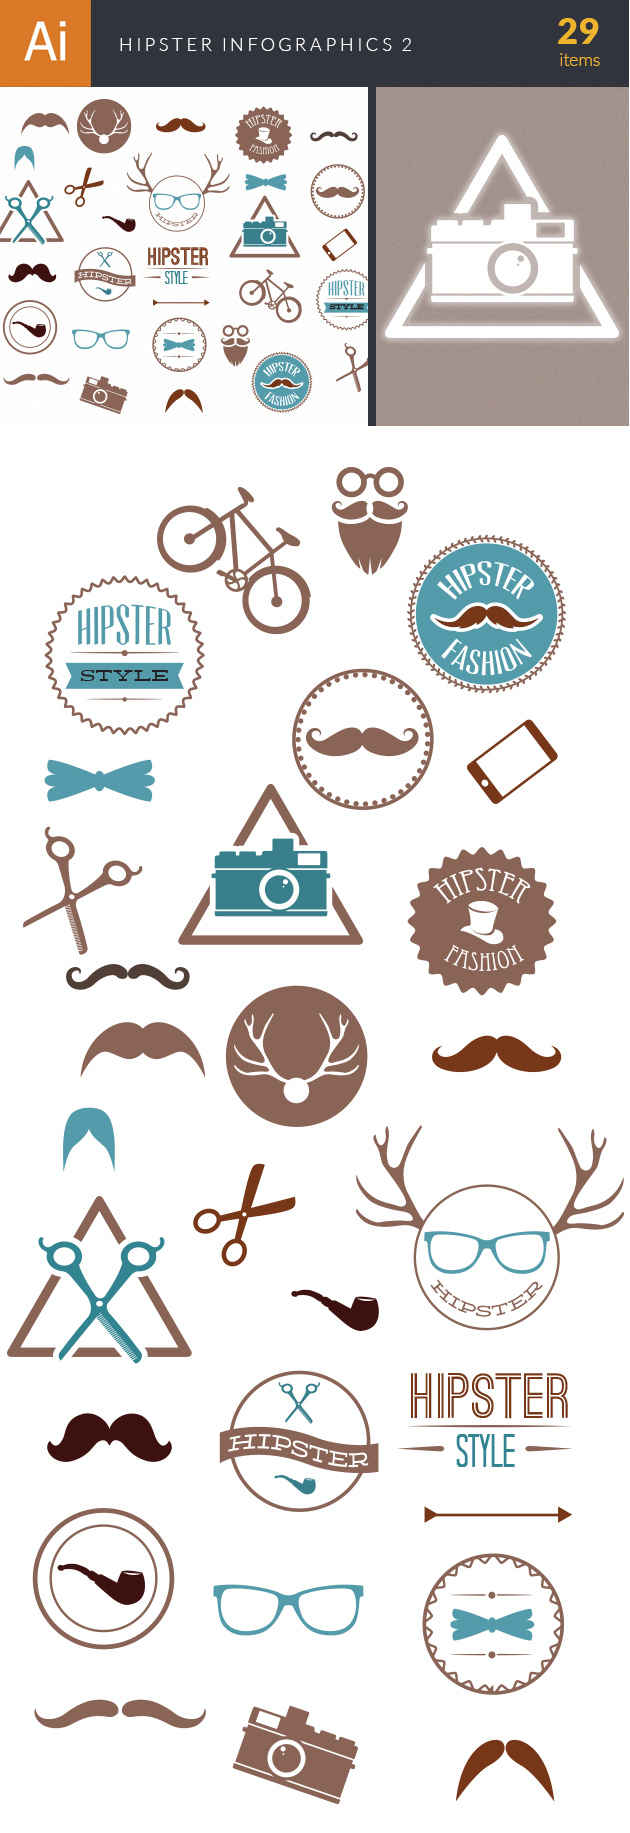 Hipster Infographics Vector Set 2 2